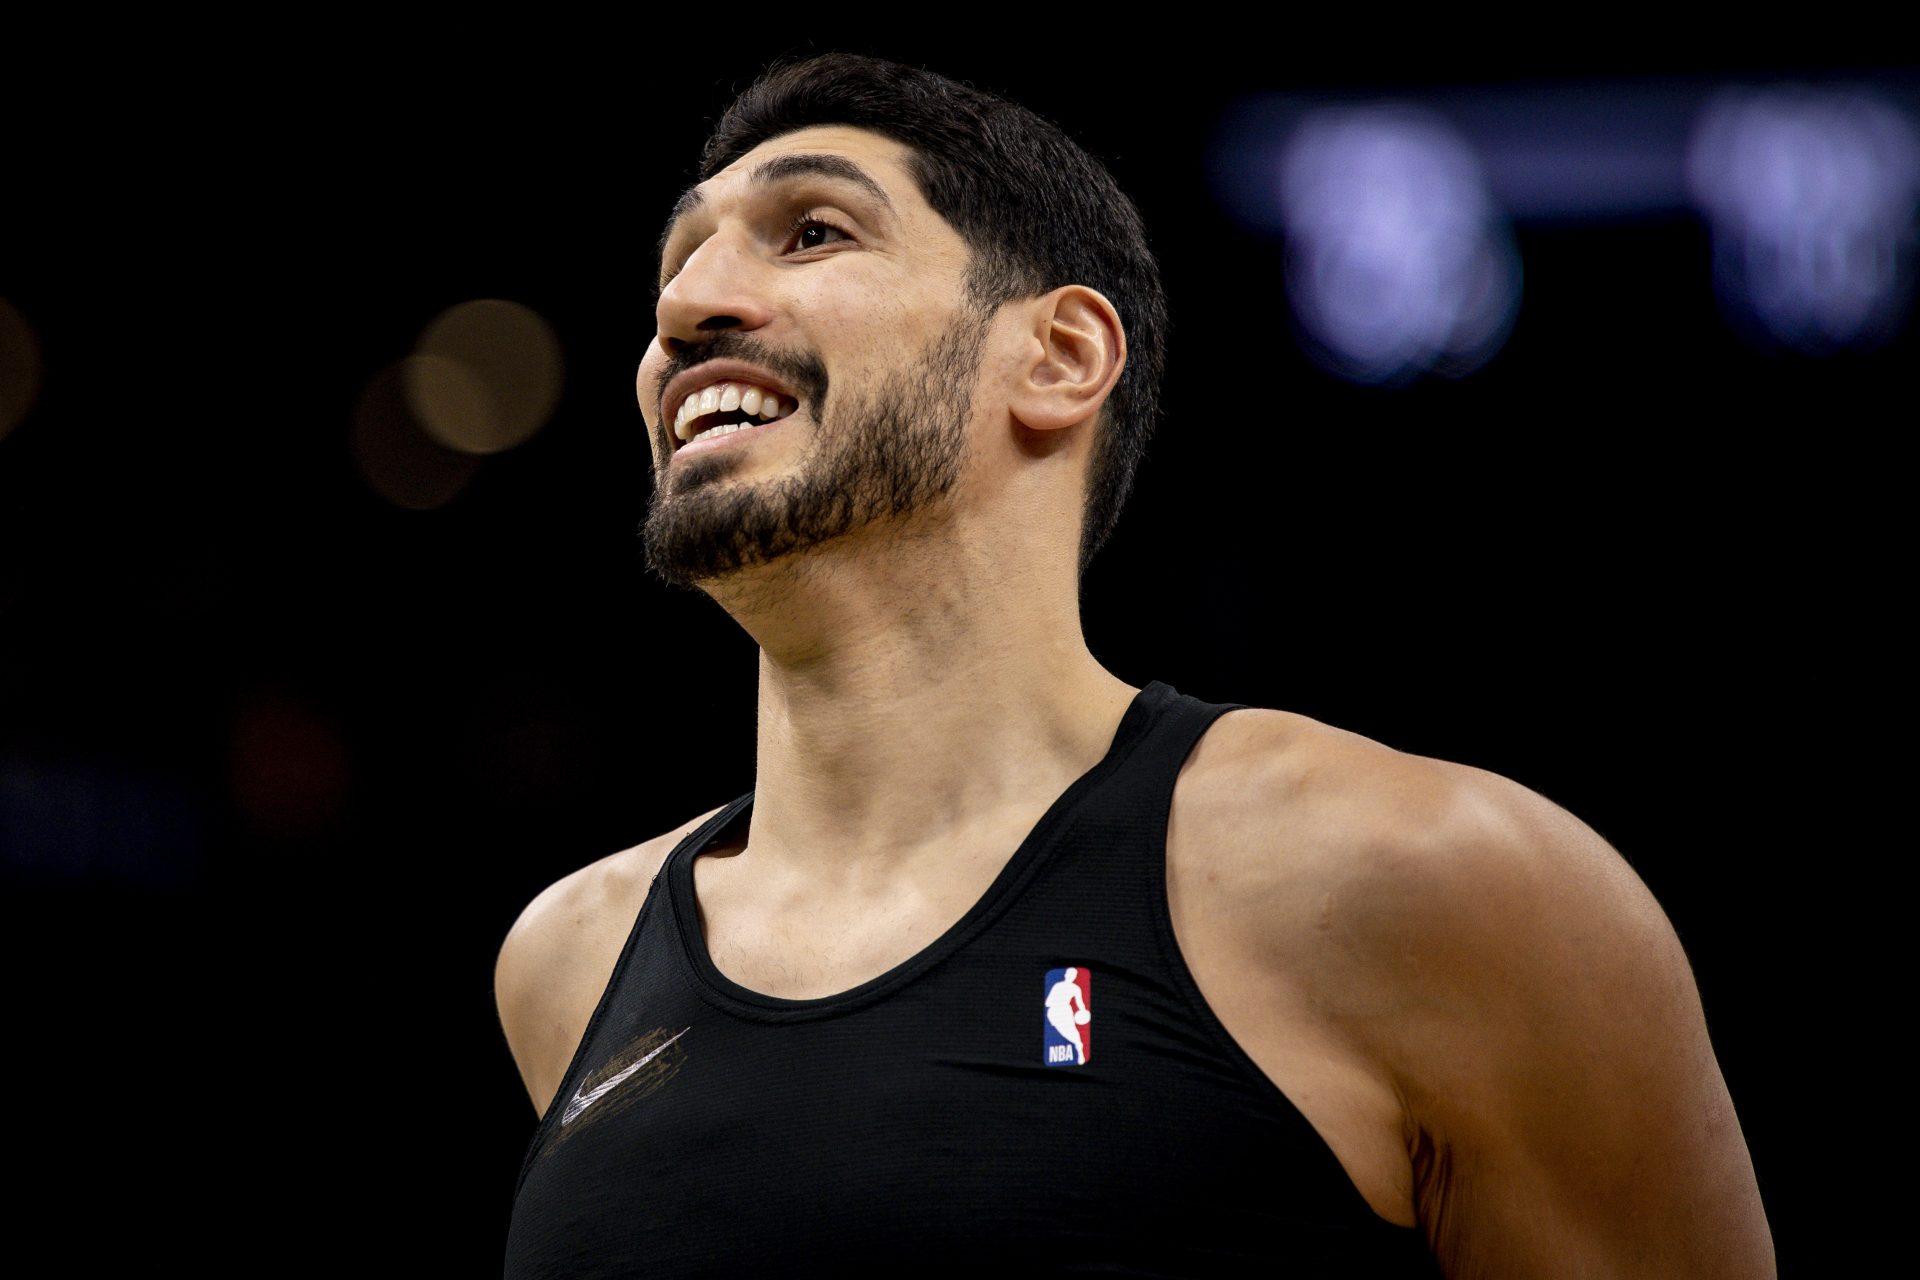 How NBA center Enes Kanter Freedom ended up on Turkey's most wanted list